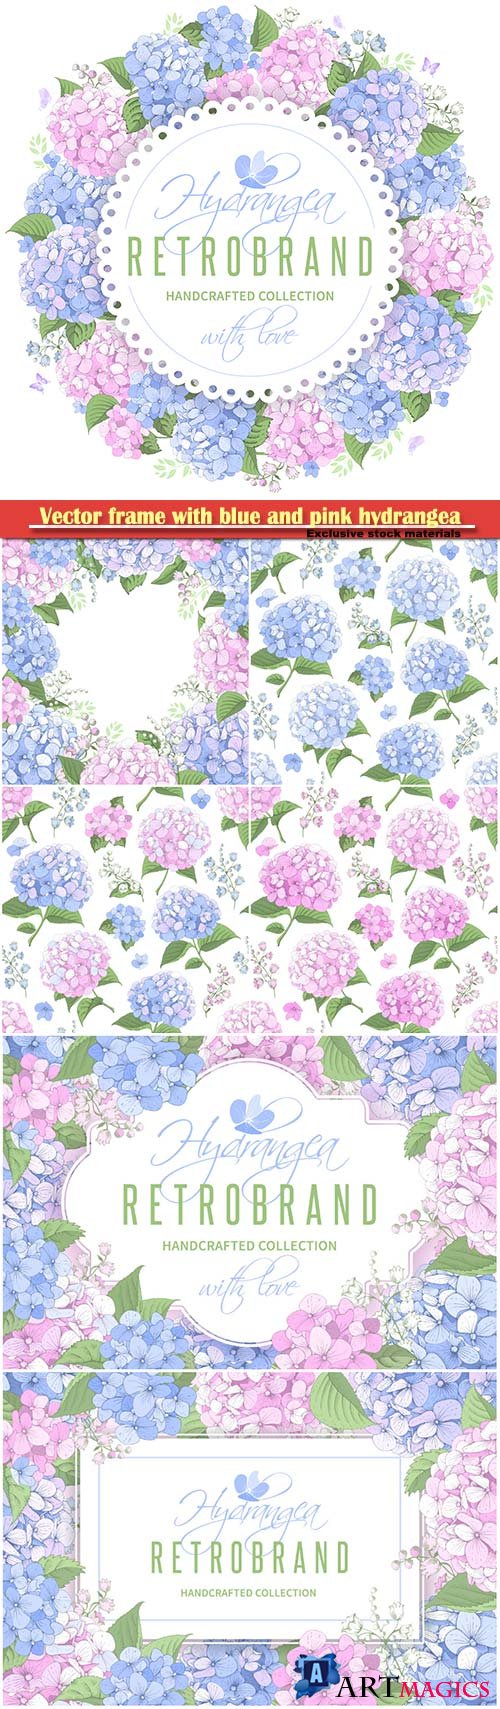 Vector frame with blue and pink hydrangea flowers